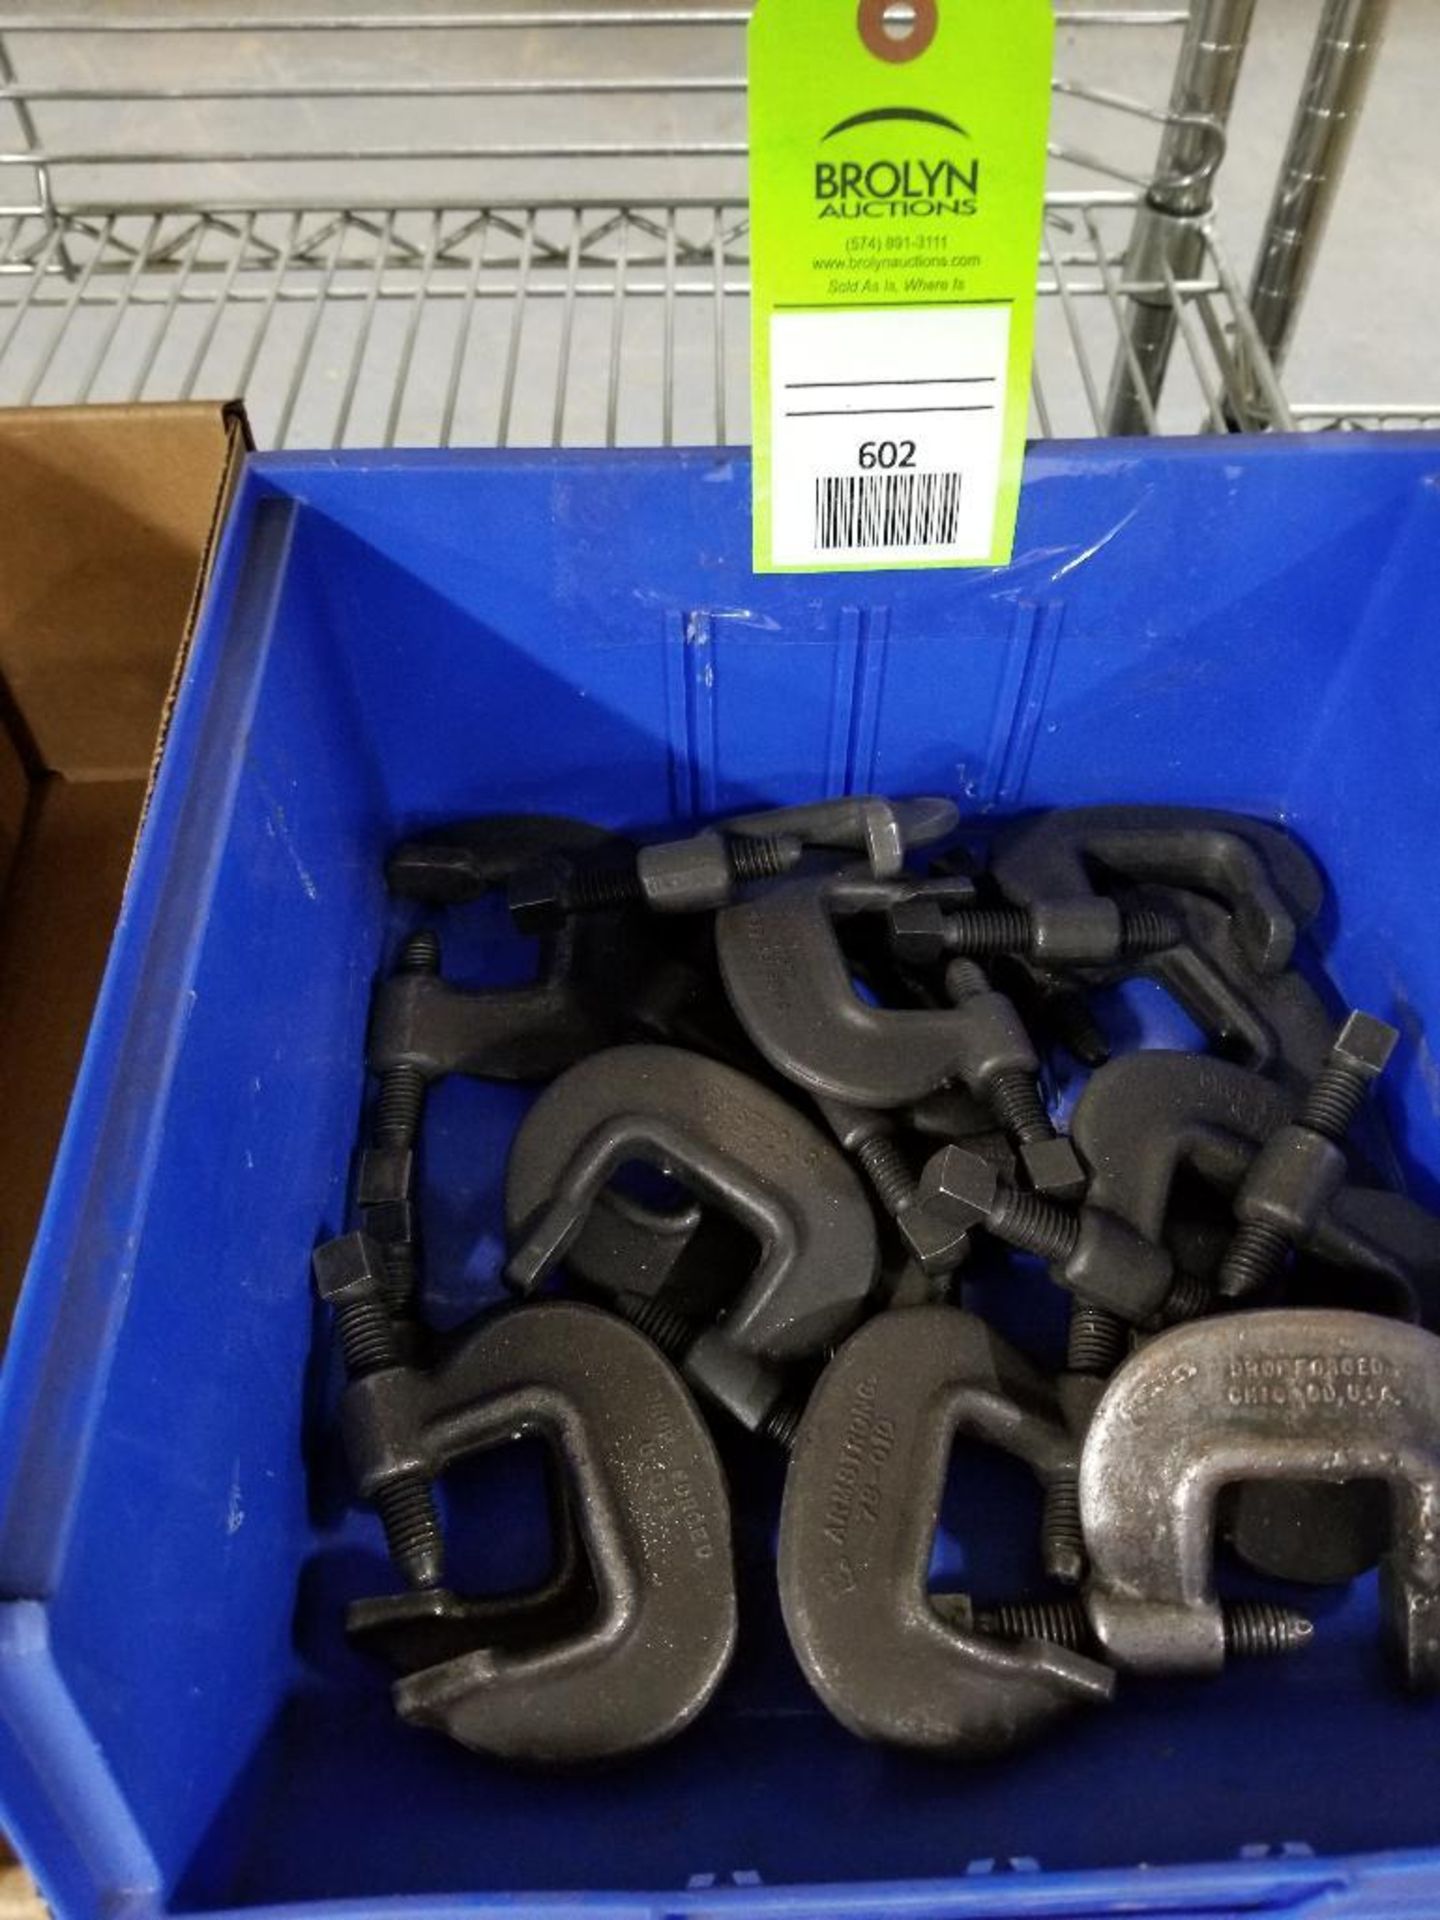 Assorted machine clamps.